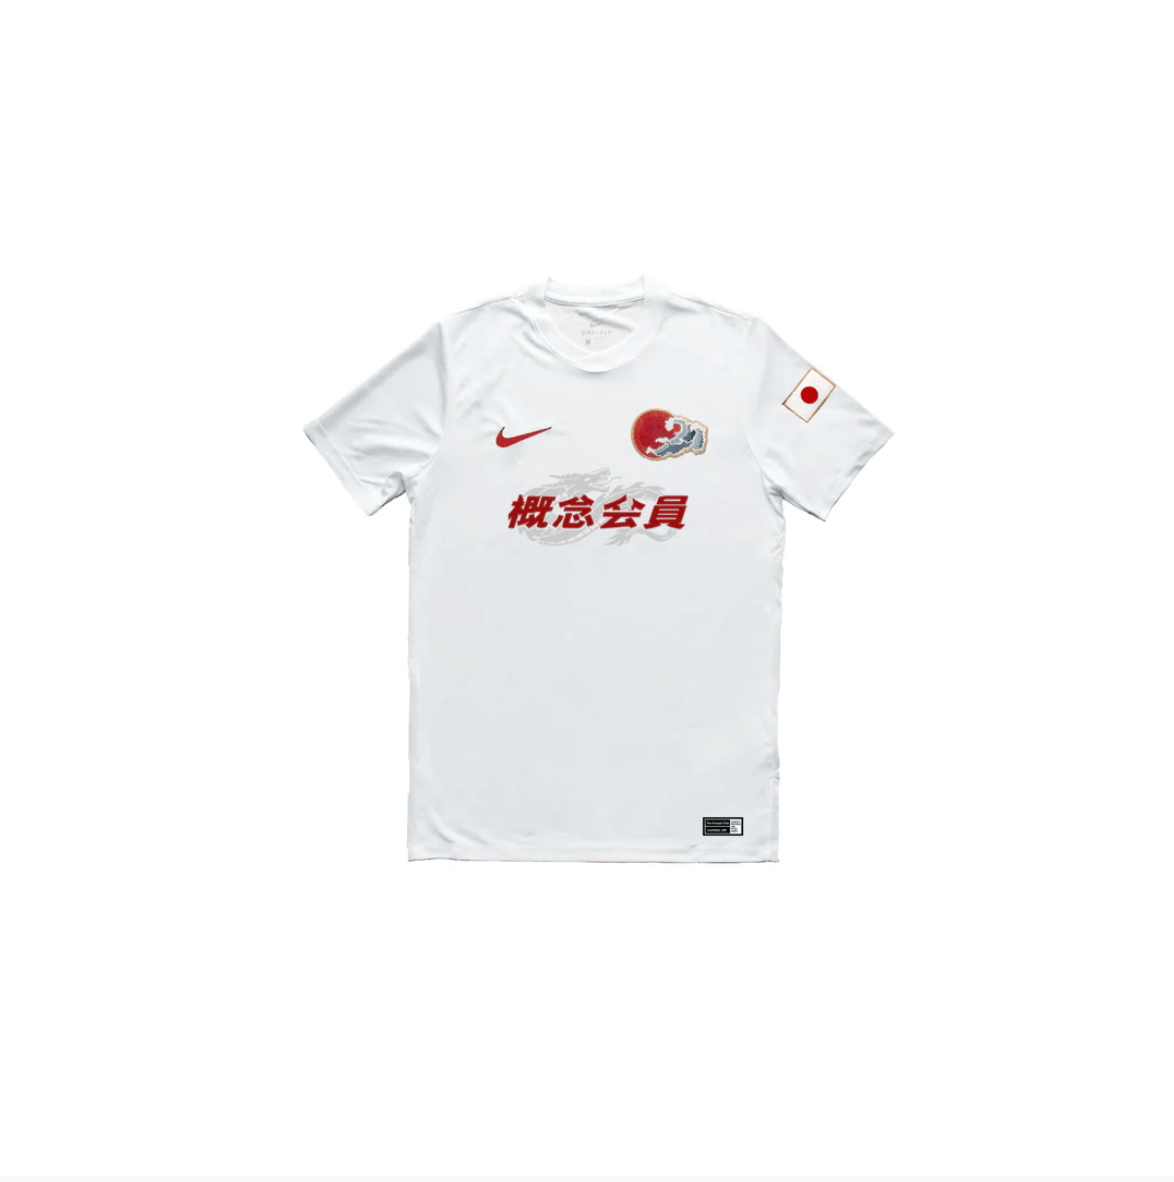 Nasa Astronaut Jersey by The Concept Club White - Football Shirt Collective